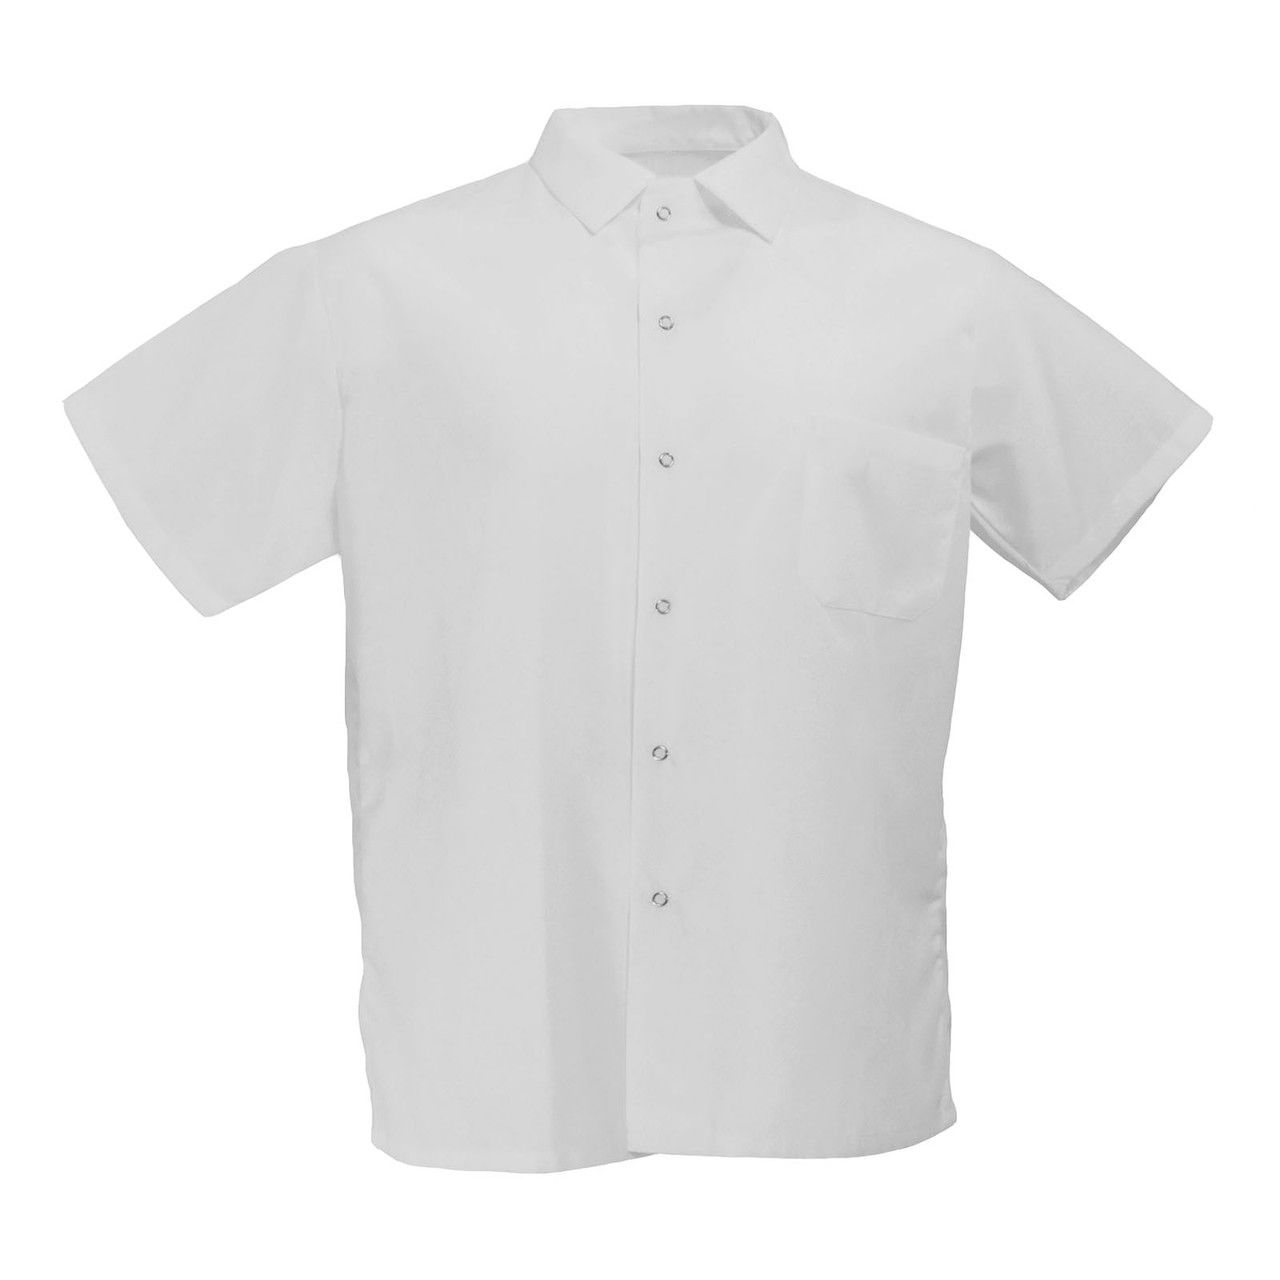 Where can one find the pocket on Chef Trend S102 chef white shirts?